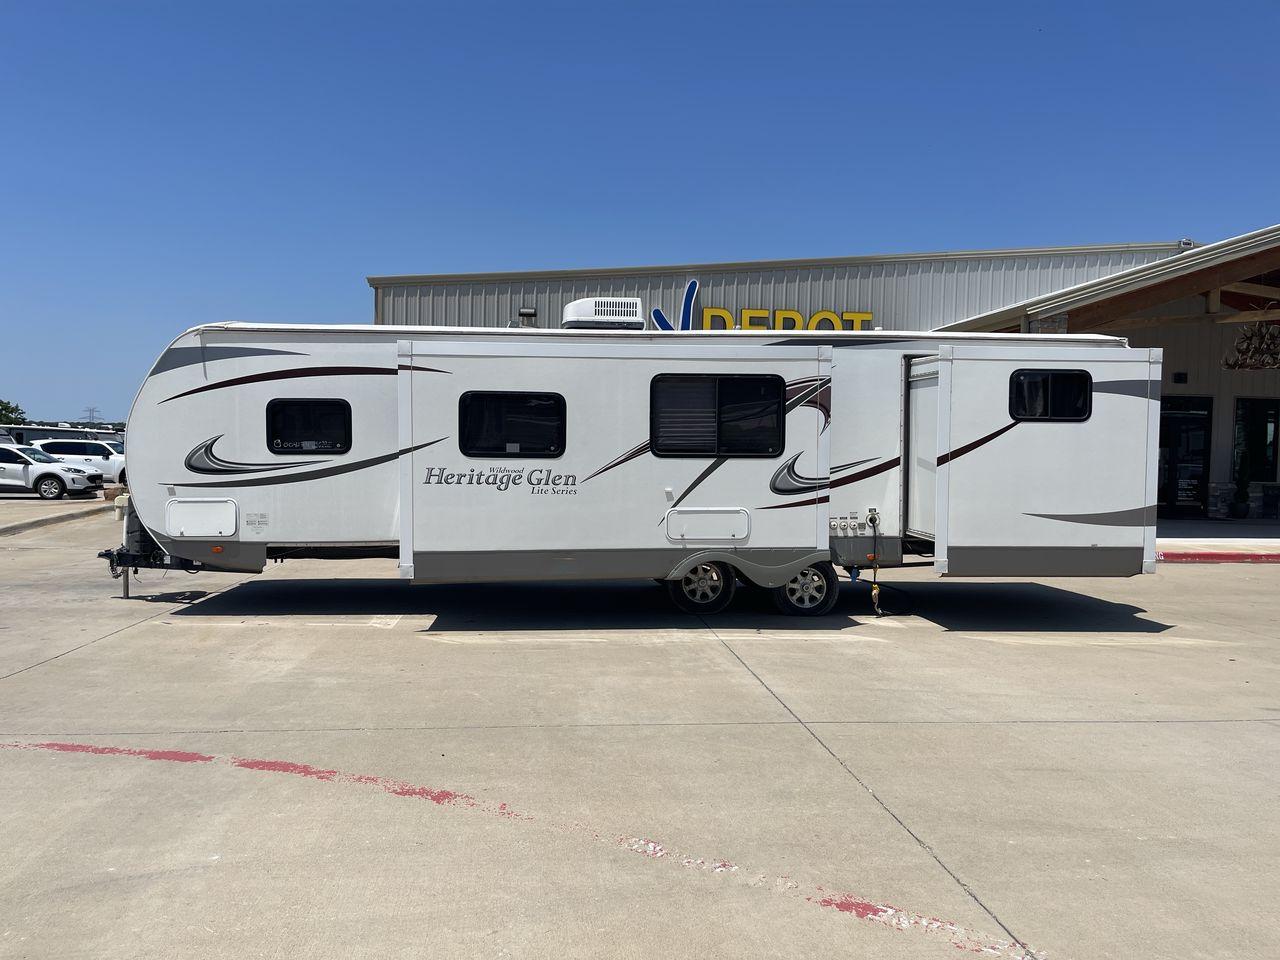 2013 FOREST RIVER HERITAGE GLEN 312QBU (4X4TWBG20DU) , Length: 35.83 ft | Dry Weight: 6,840 lbs. | Slides: 2 transmission, located at 4319 N Main Street, Cleburne, TX, 76033, (817) 221-0660, 32.435829, -97.384178 - The 2013 Forest River Heritage Glen 312QBUD is a travel trailer that changes the way you camp by combining comfort, style, and usefulness in a perfect way. This 35.83-foot marvel is made to make every trip an exciting adventure to remember. When it comes to weight, the Heritage Glen 312QBUD is made - Photo #25